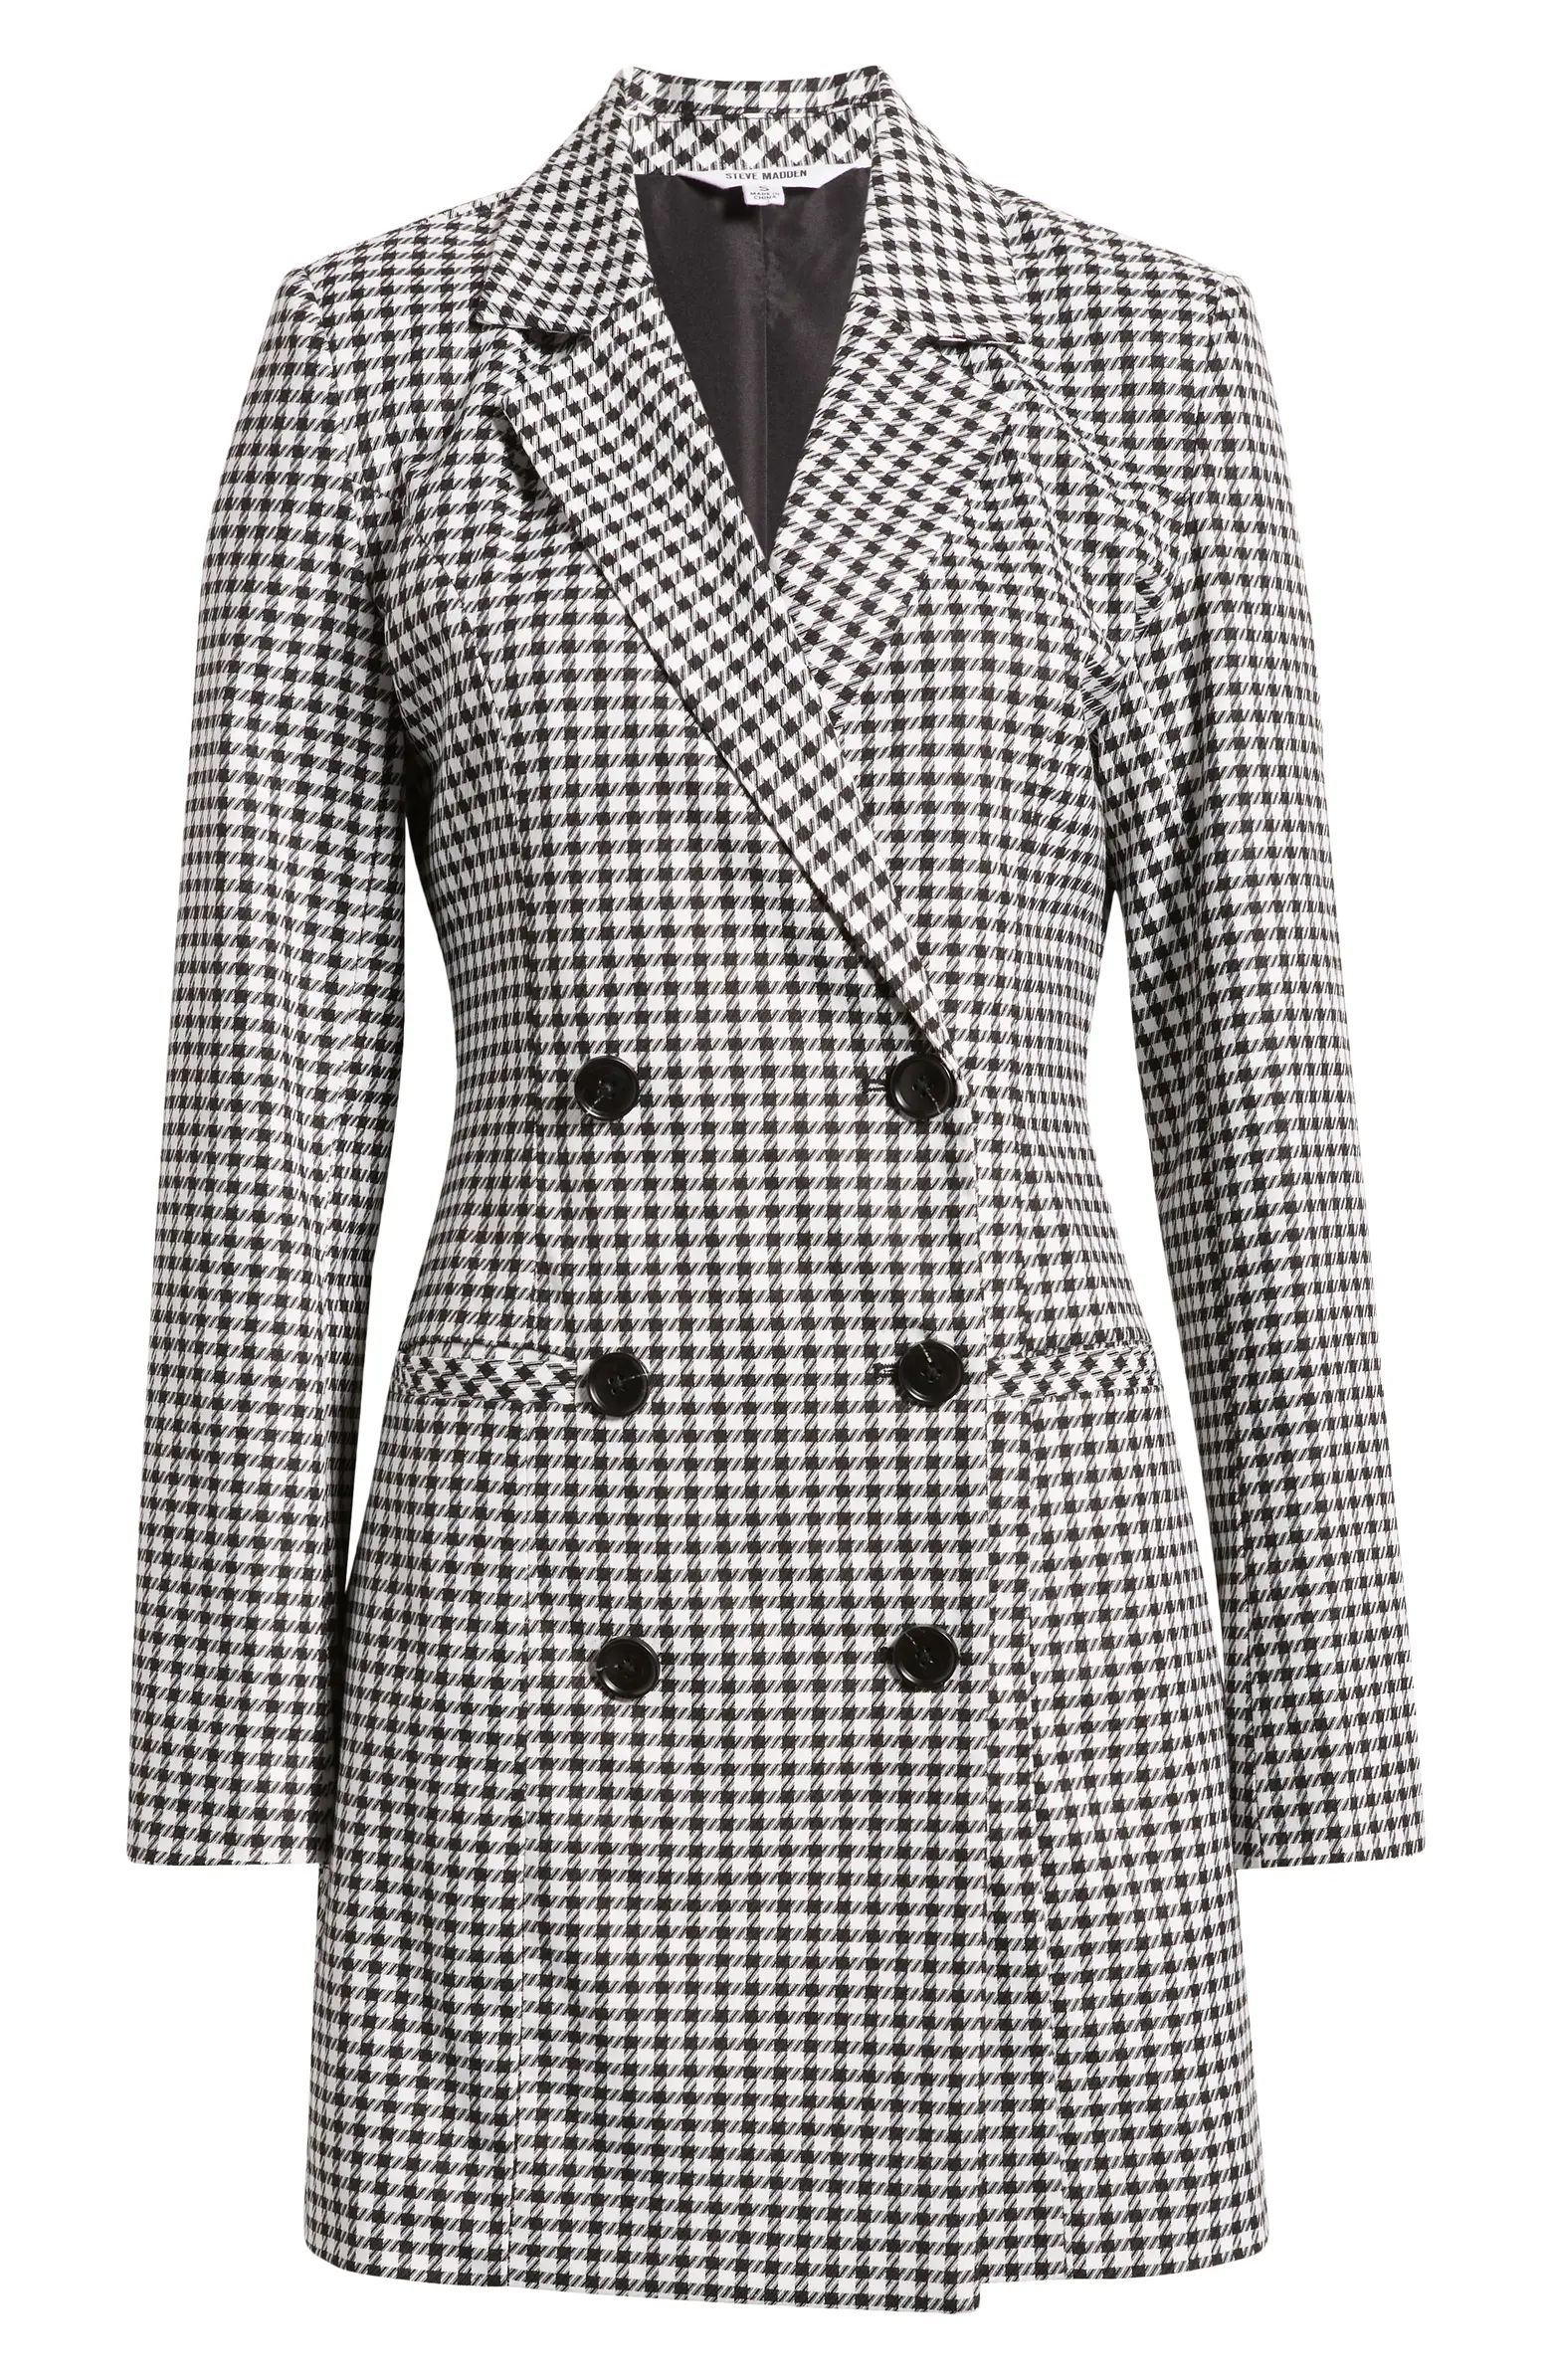 Double Breasted Houndstooth Check Long Sleeve Blazer Dress | Nordstrom